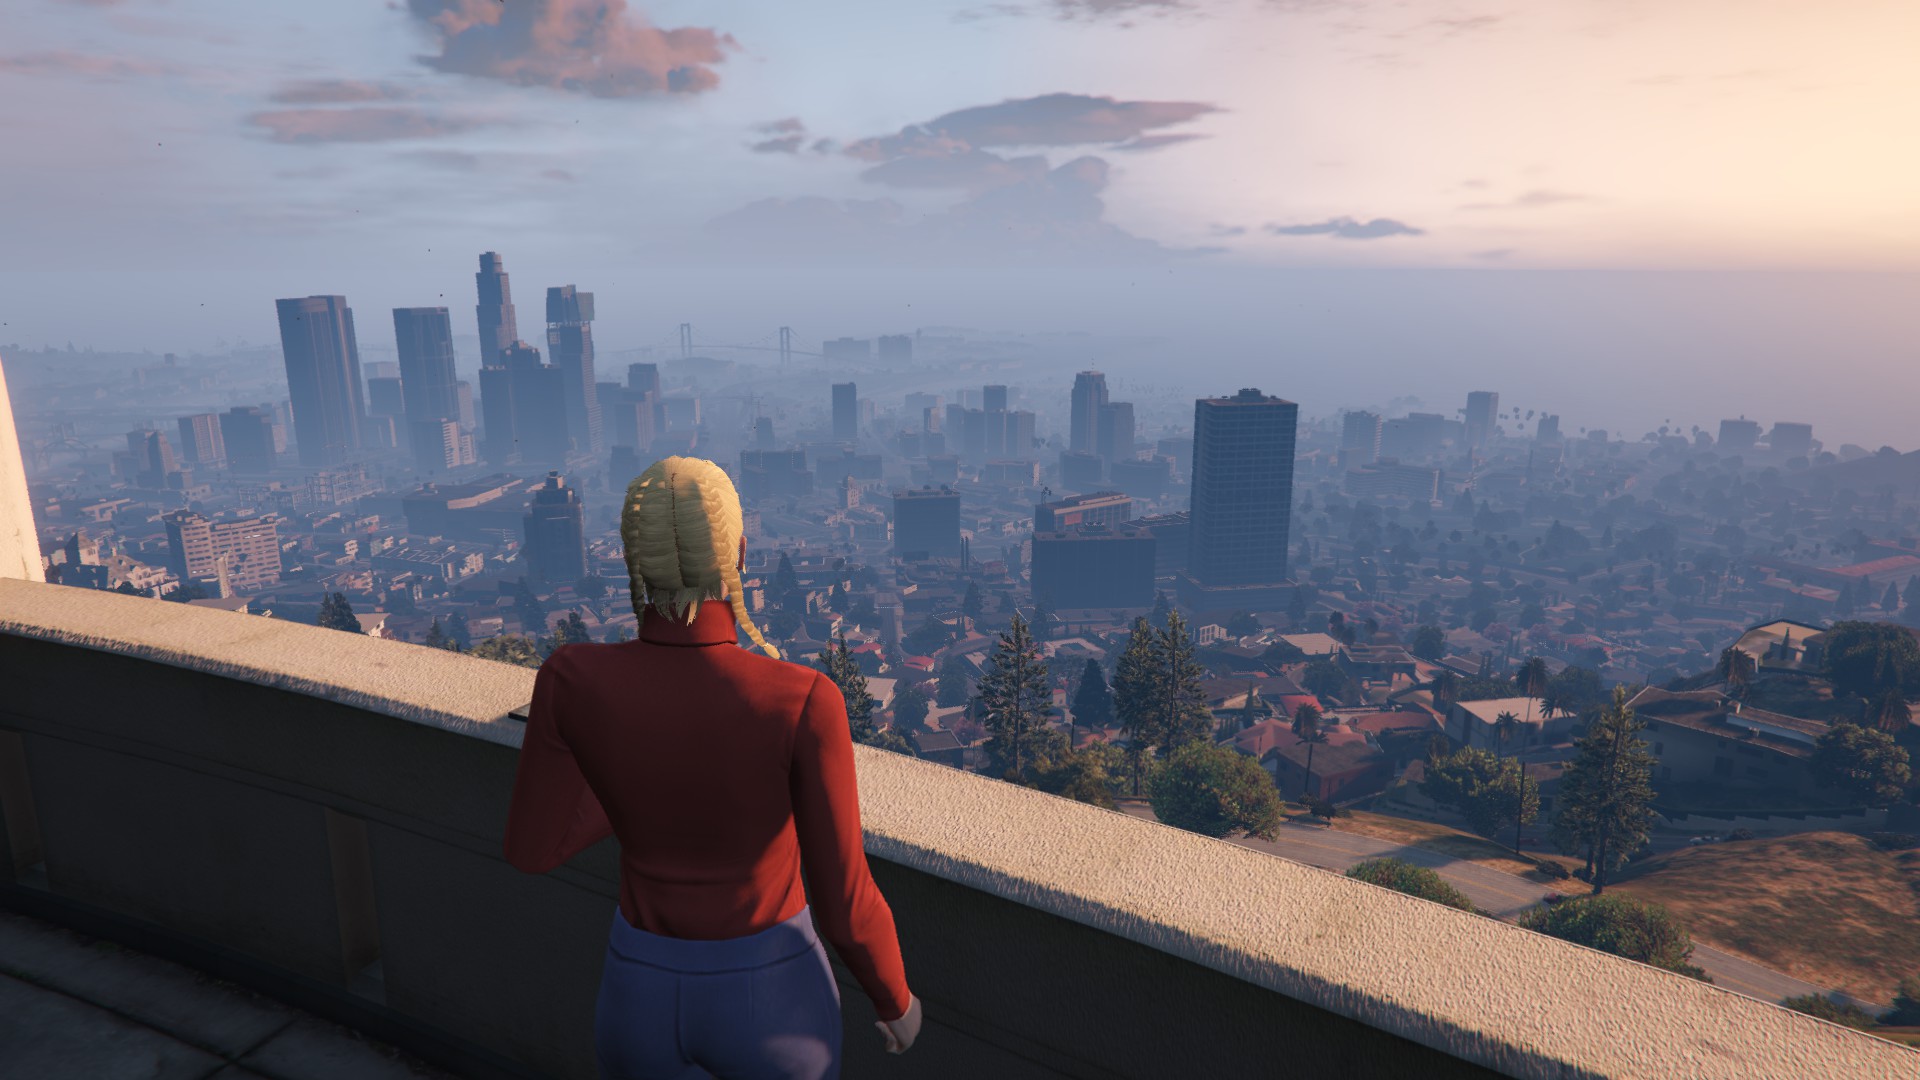 General 1920x1080 Grand Theft Auto V Grand Theft Auto Online blonde video game girls top view landscape leggings red tops clouds city